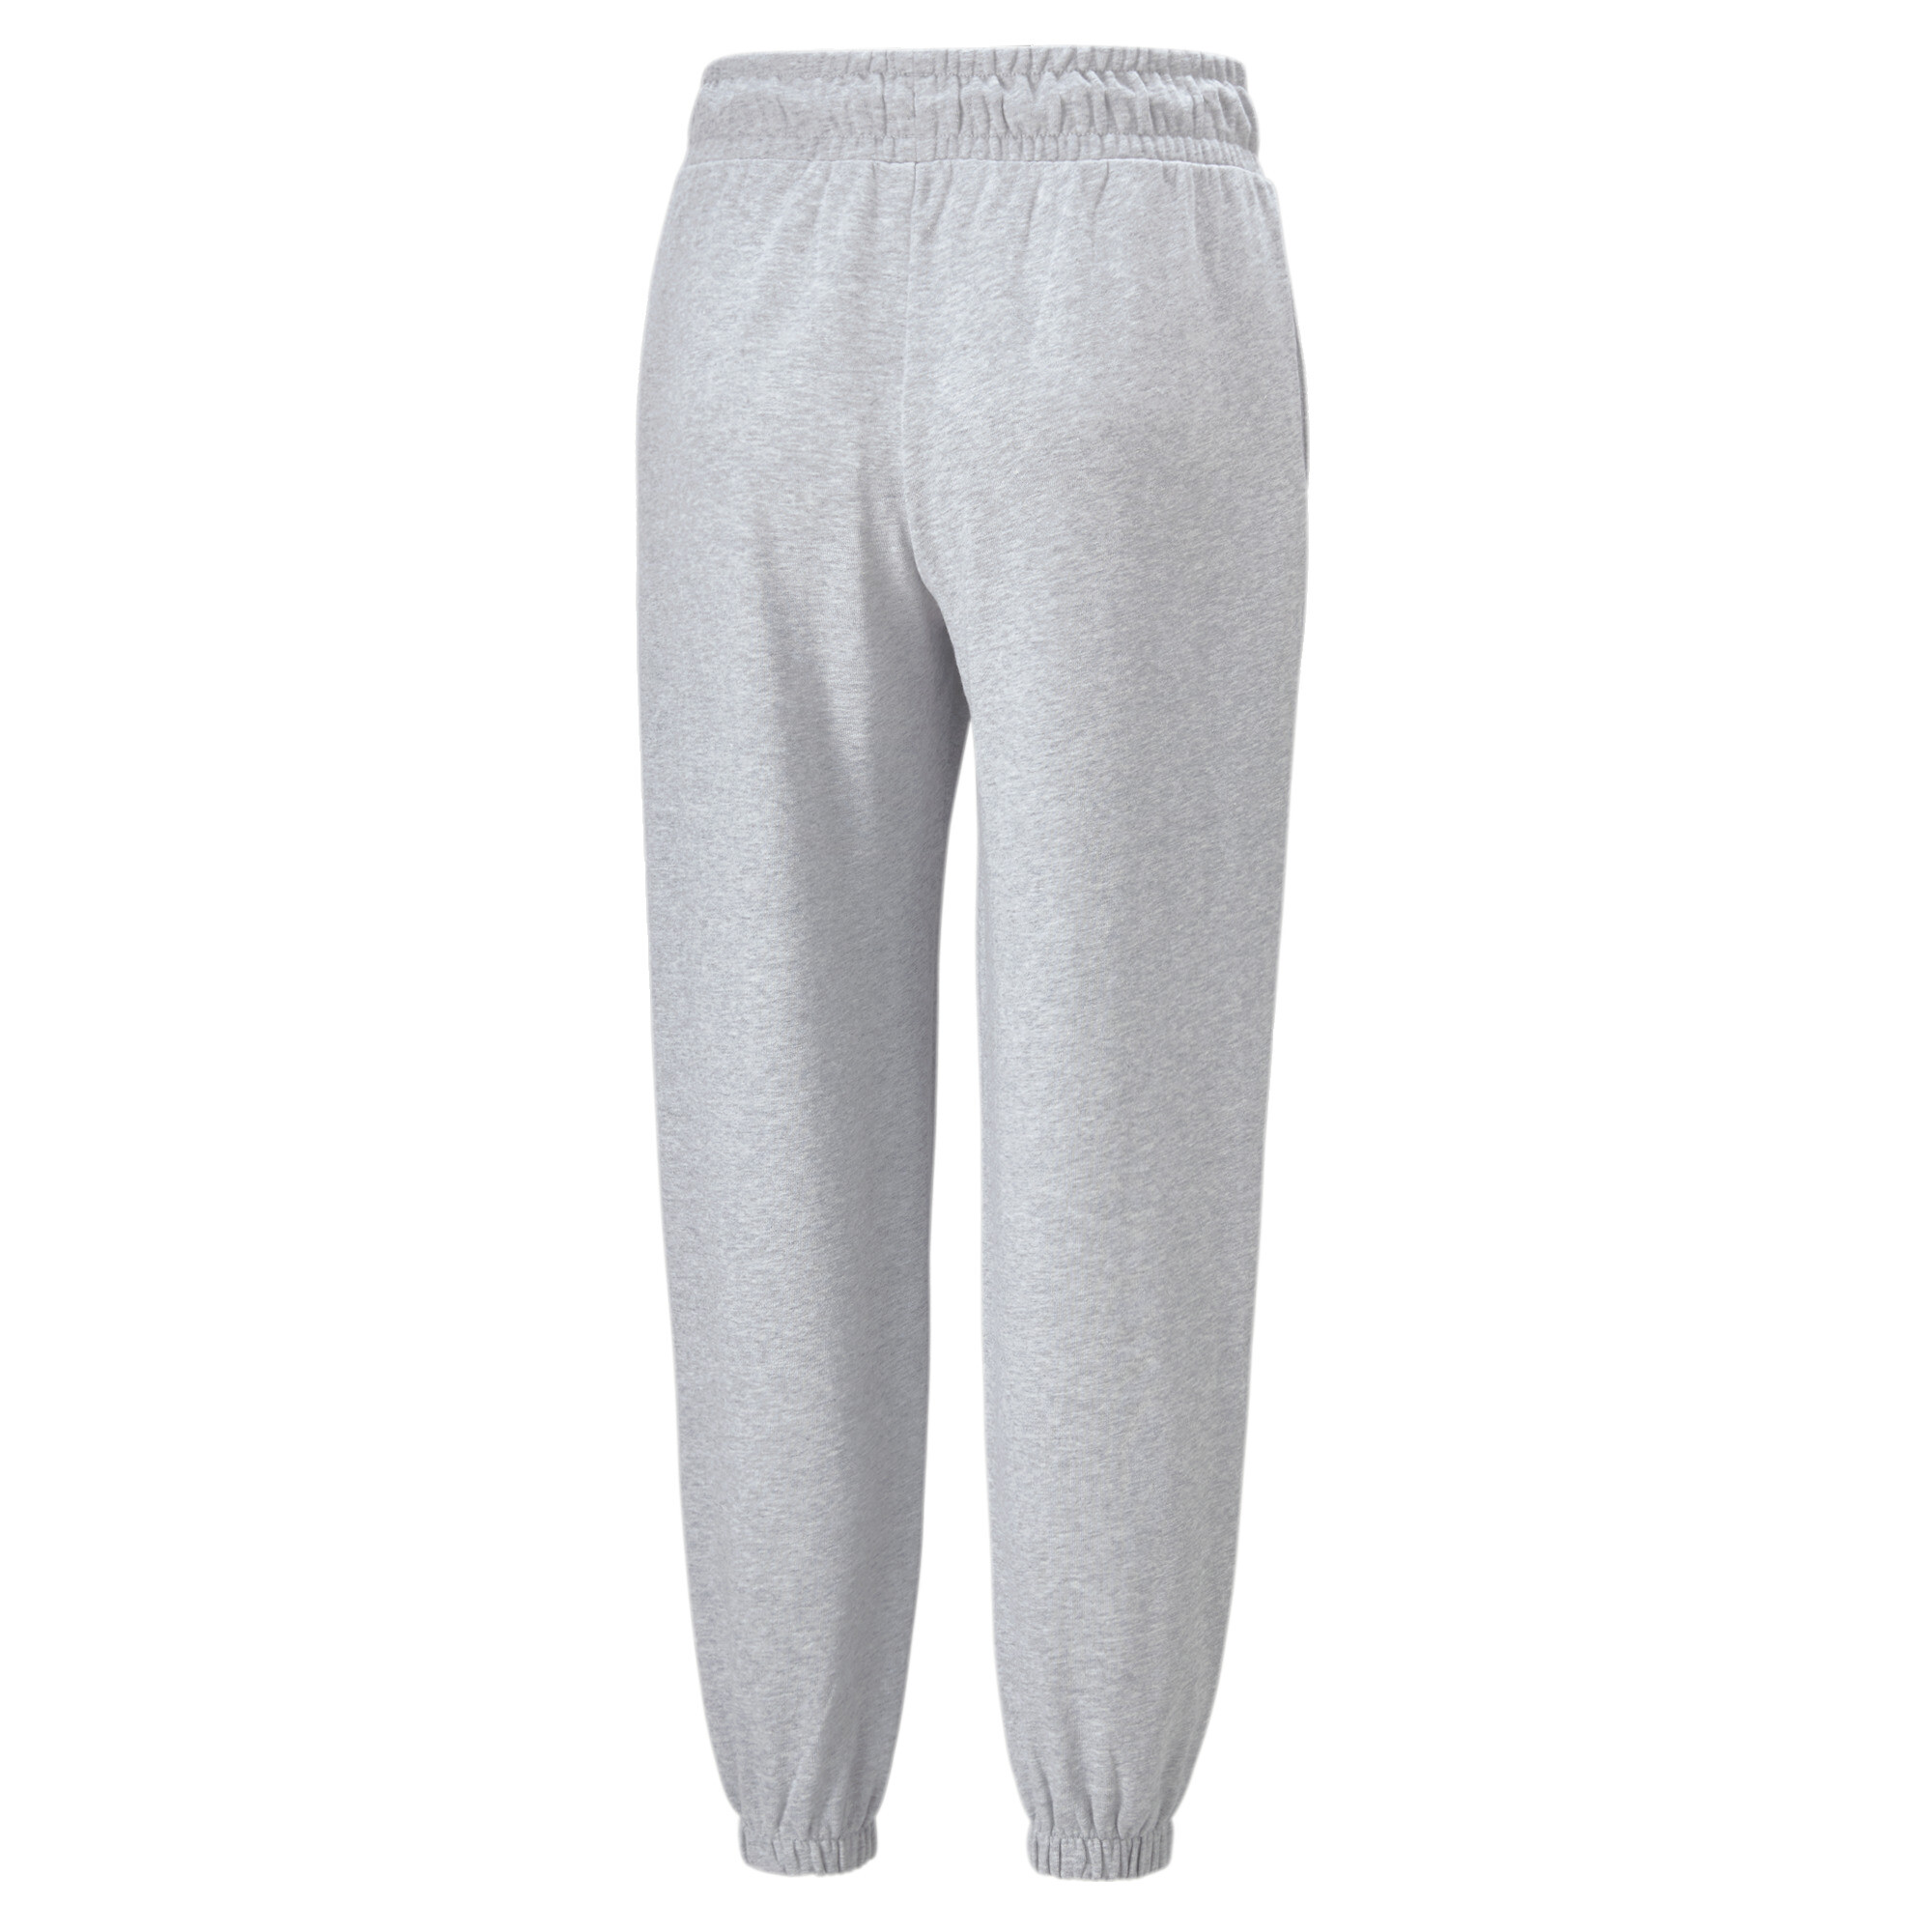 Women's Puma Classics PLUS Relaxed's Joggers, Gray, Size 3X, Clothing